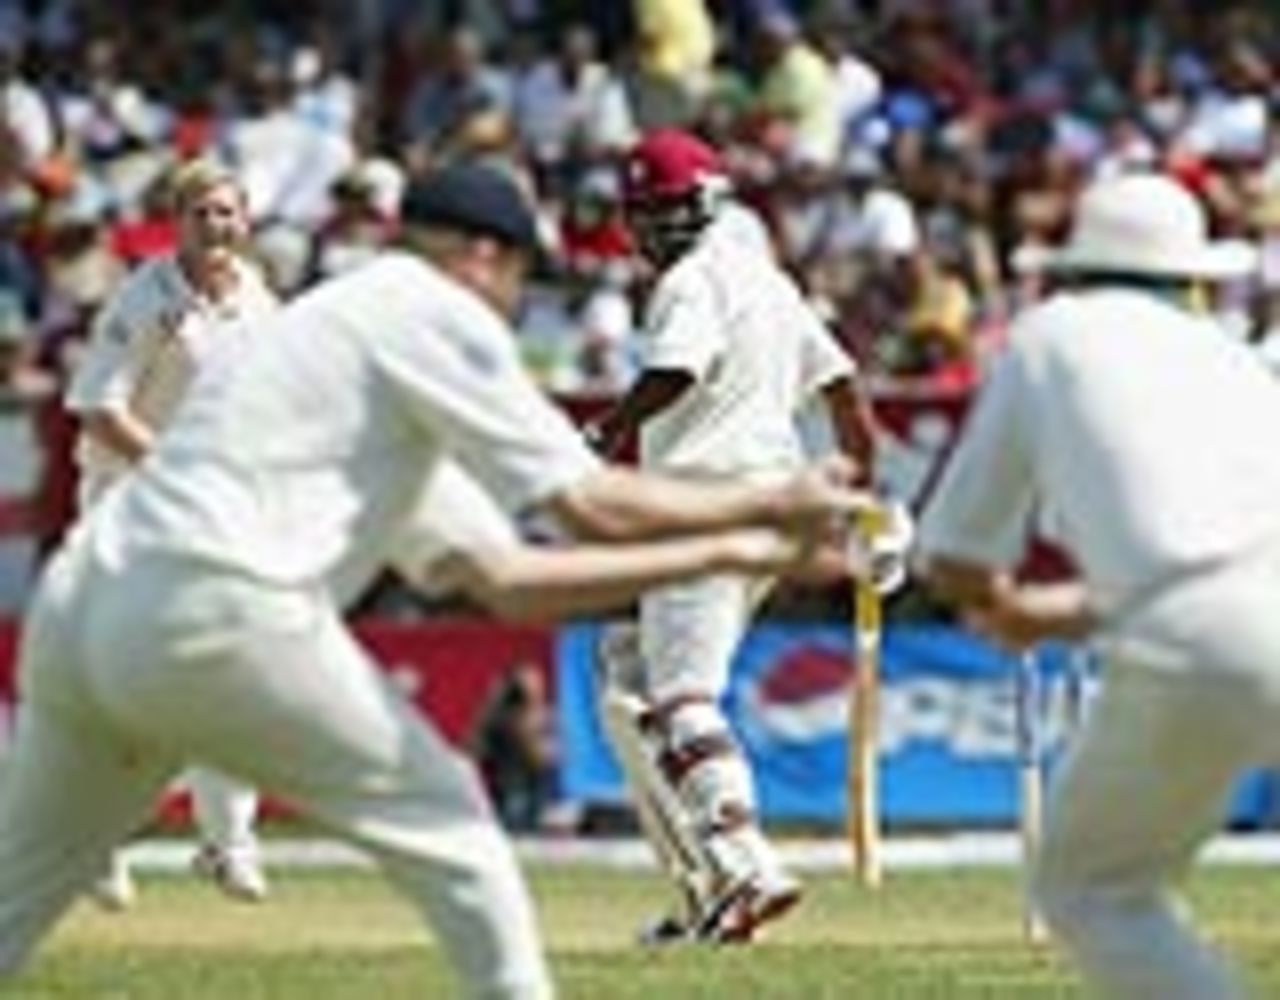 Flintoff takes the slip catch which sent back Lara